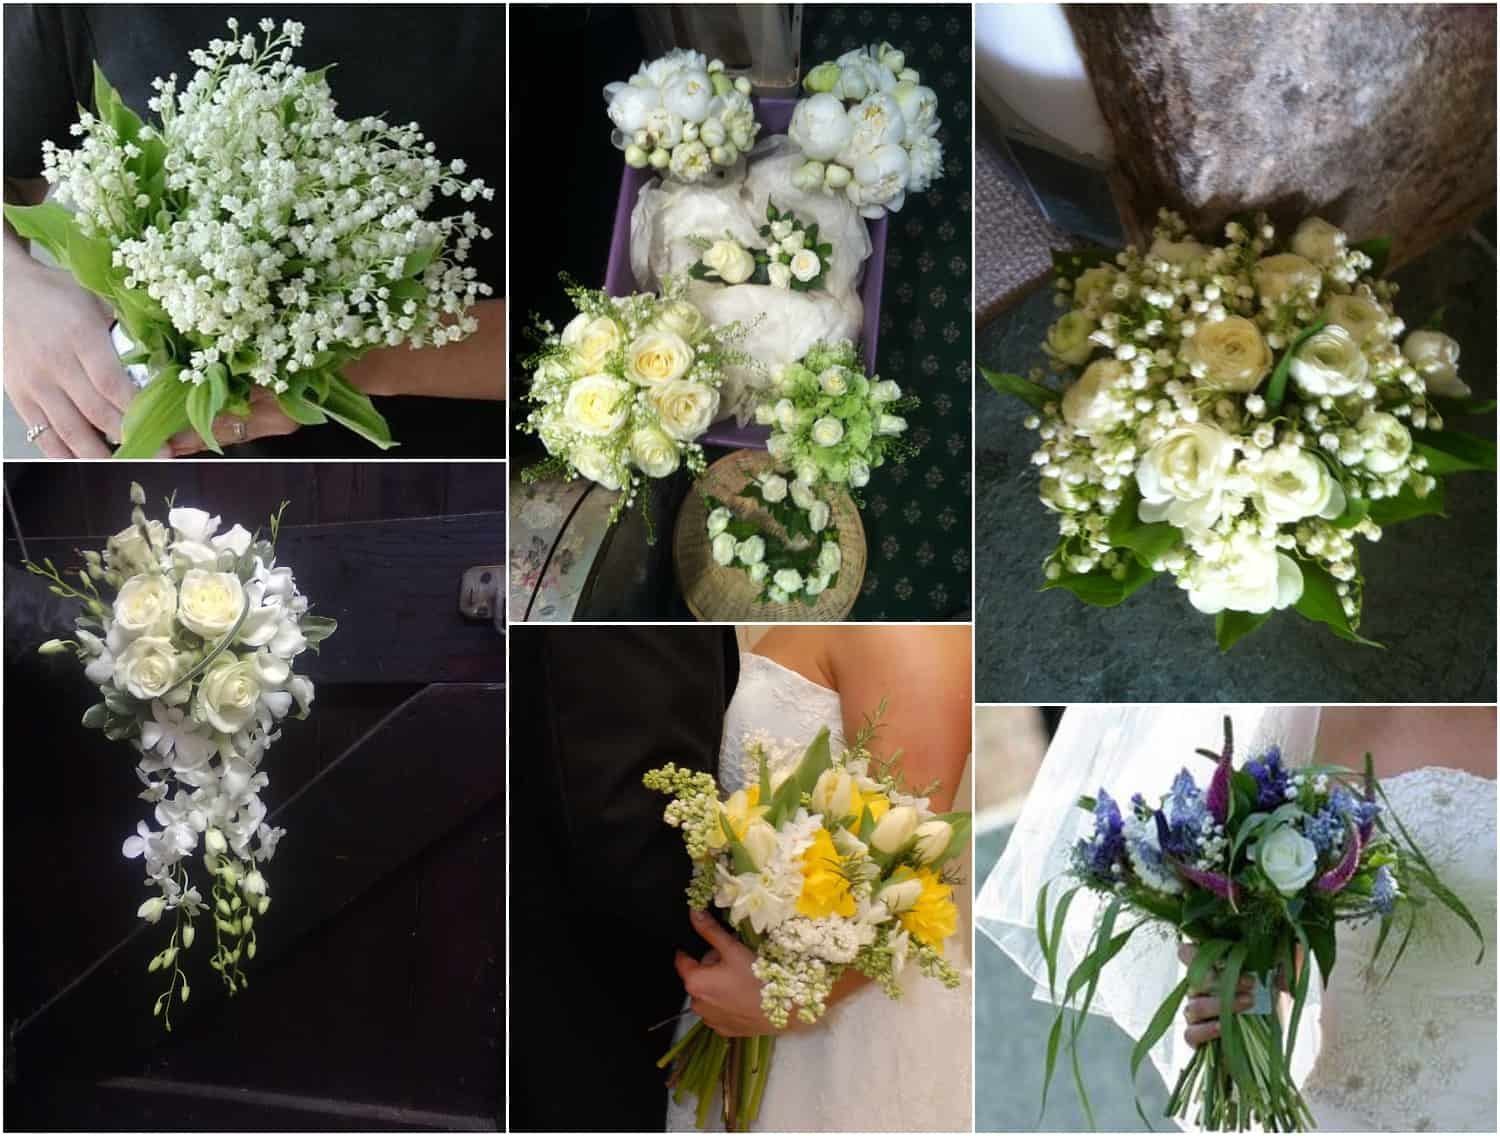 Wedding bouquets with seasonal flowers, by Sarah Pepper